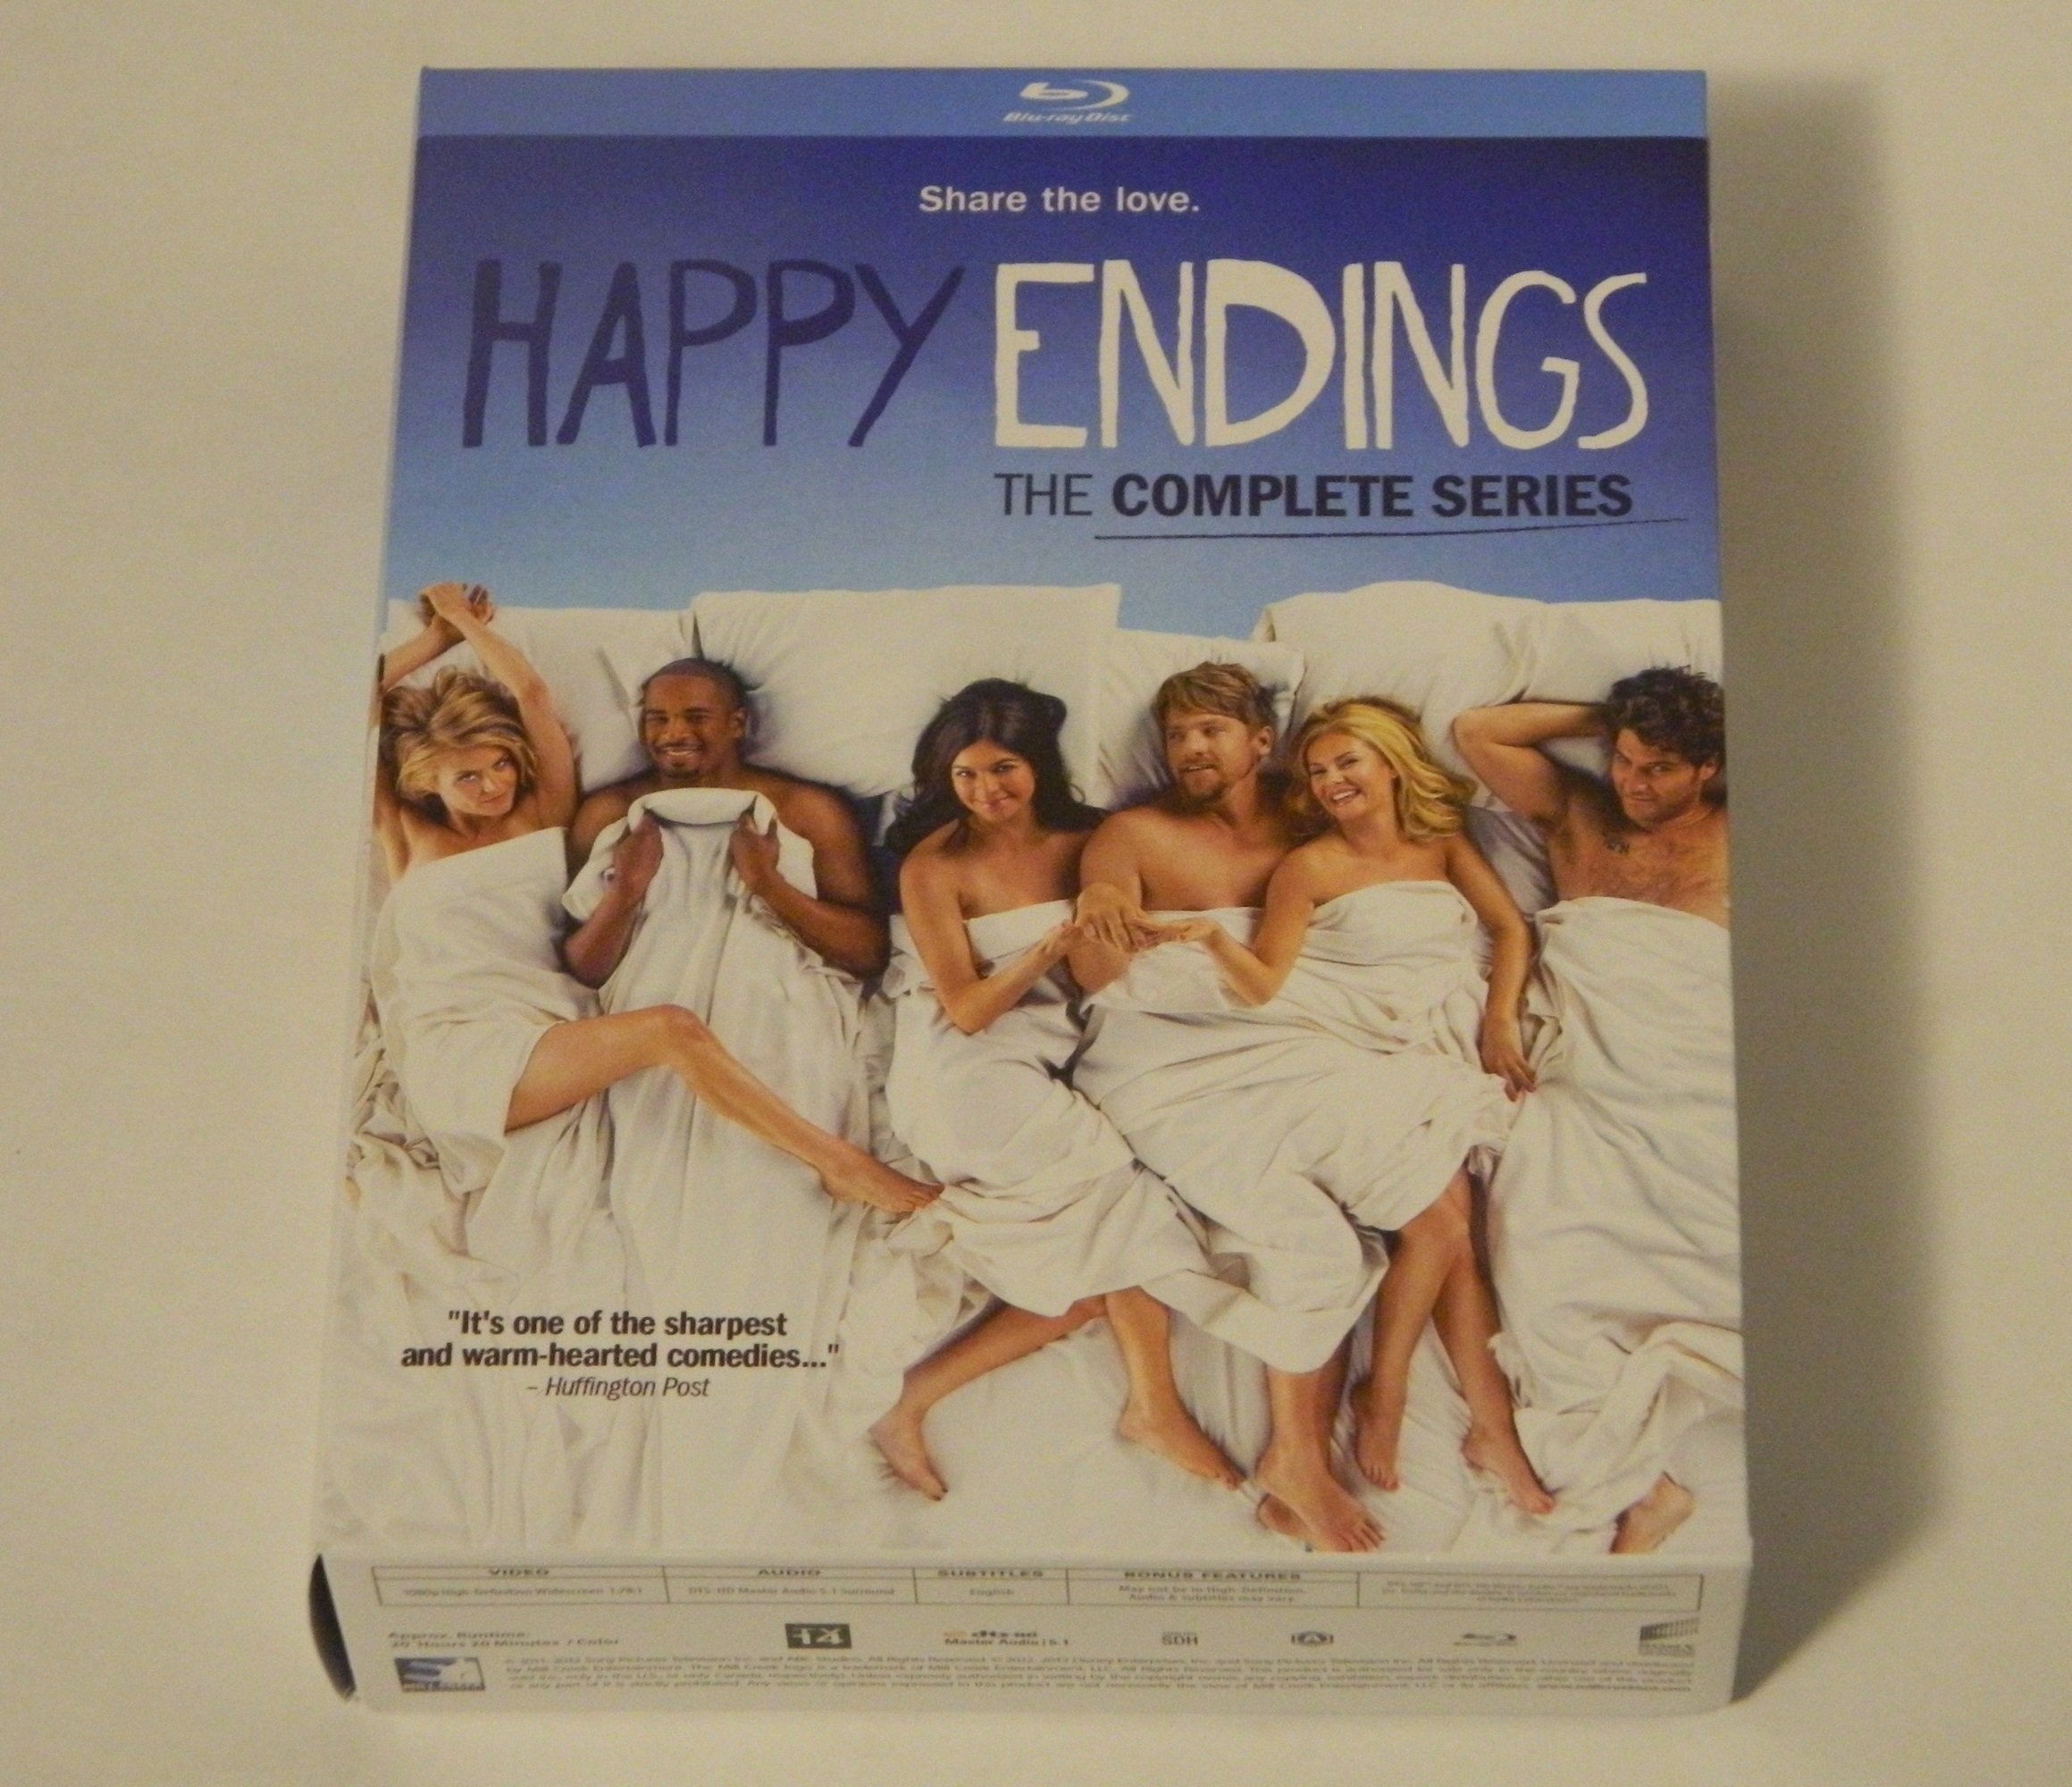 Happy Endings: The Complete Series Blu-ray Review